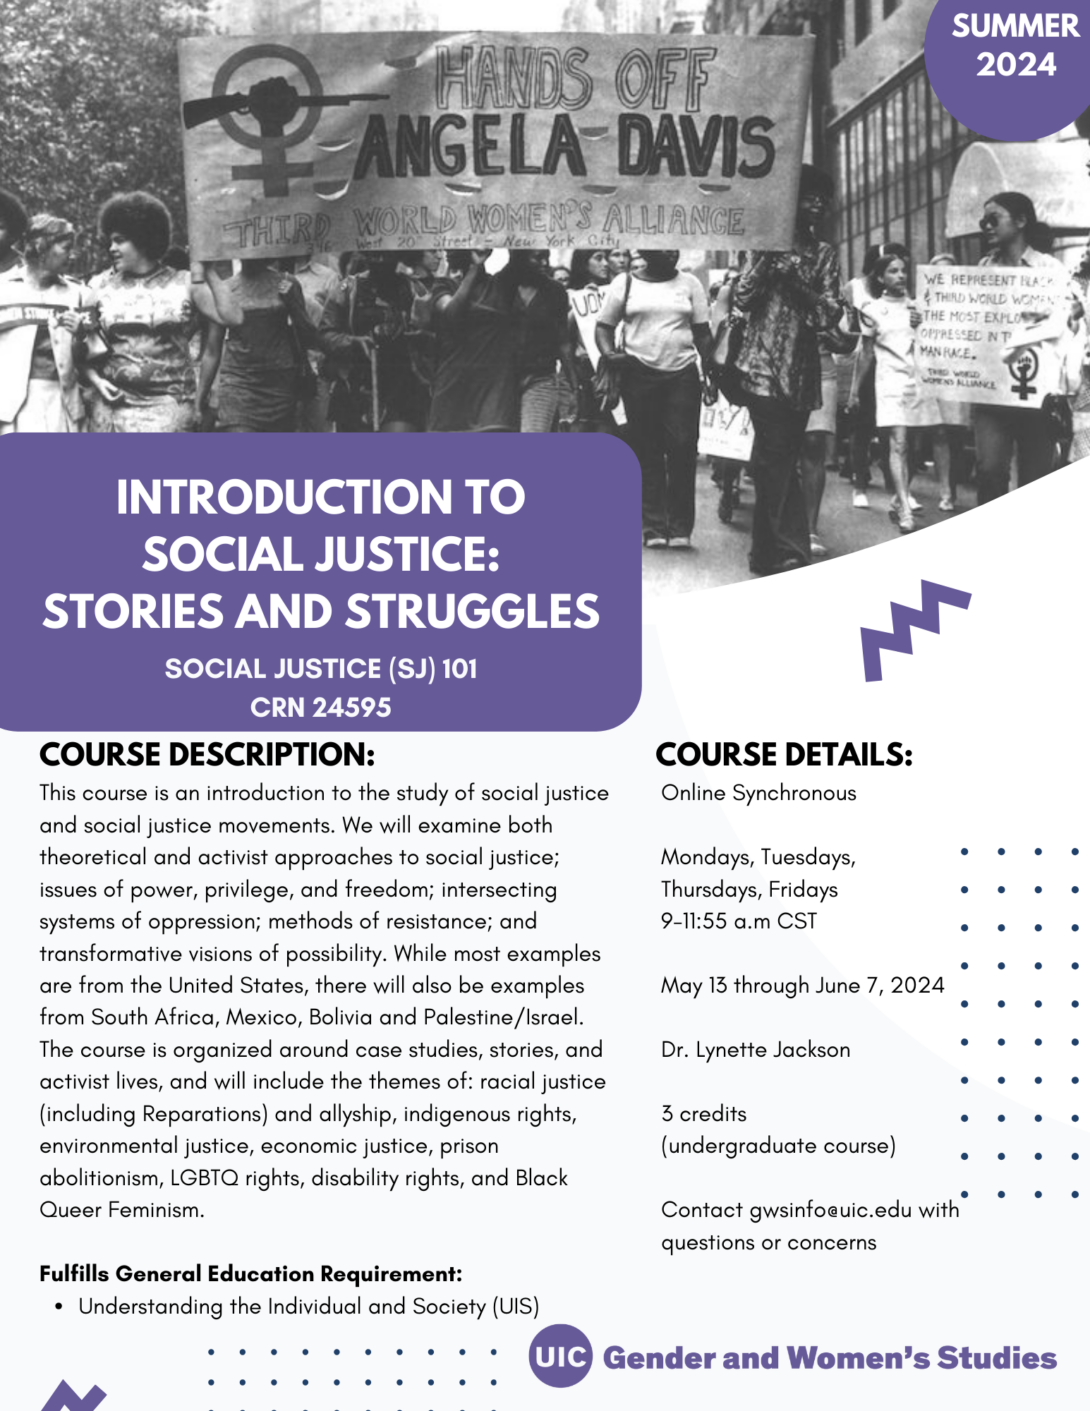 A flyer promoting the summer 2024 Introduction to Social Justice course. The top portion of the flyer includes a black and white photo of protestors marching with a banner that says Hands Off Angela Davis Third World Women's Alliance. In the top right corner is a purple circle with Summer 2024 inside it in white text. The bottom left portion of the photo is covered with a purple block that includes the course title in white text. Below that is the course description and course details in black text on a white background. A purple GWS logo appears in the bottom right of the flyer. Parallel lines of purple dots and purple geometric designs decorate the page.